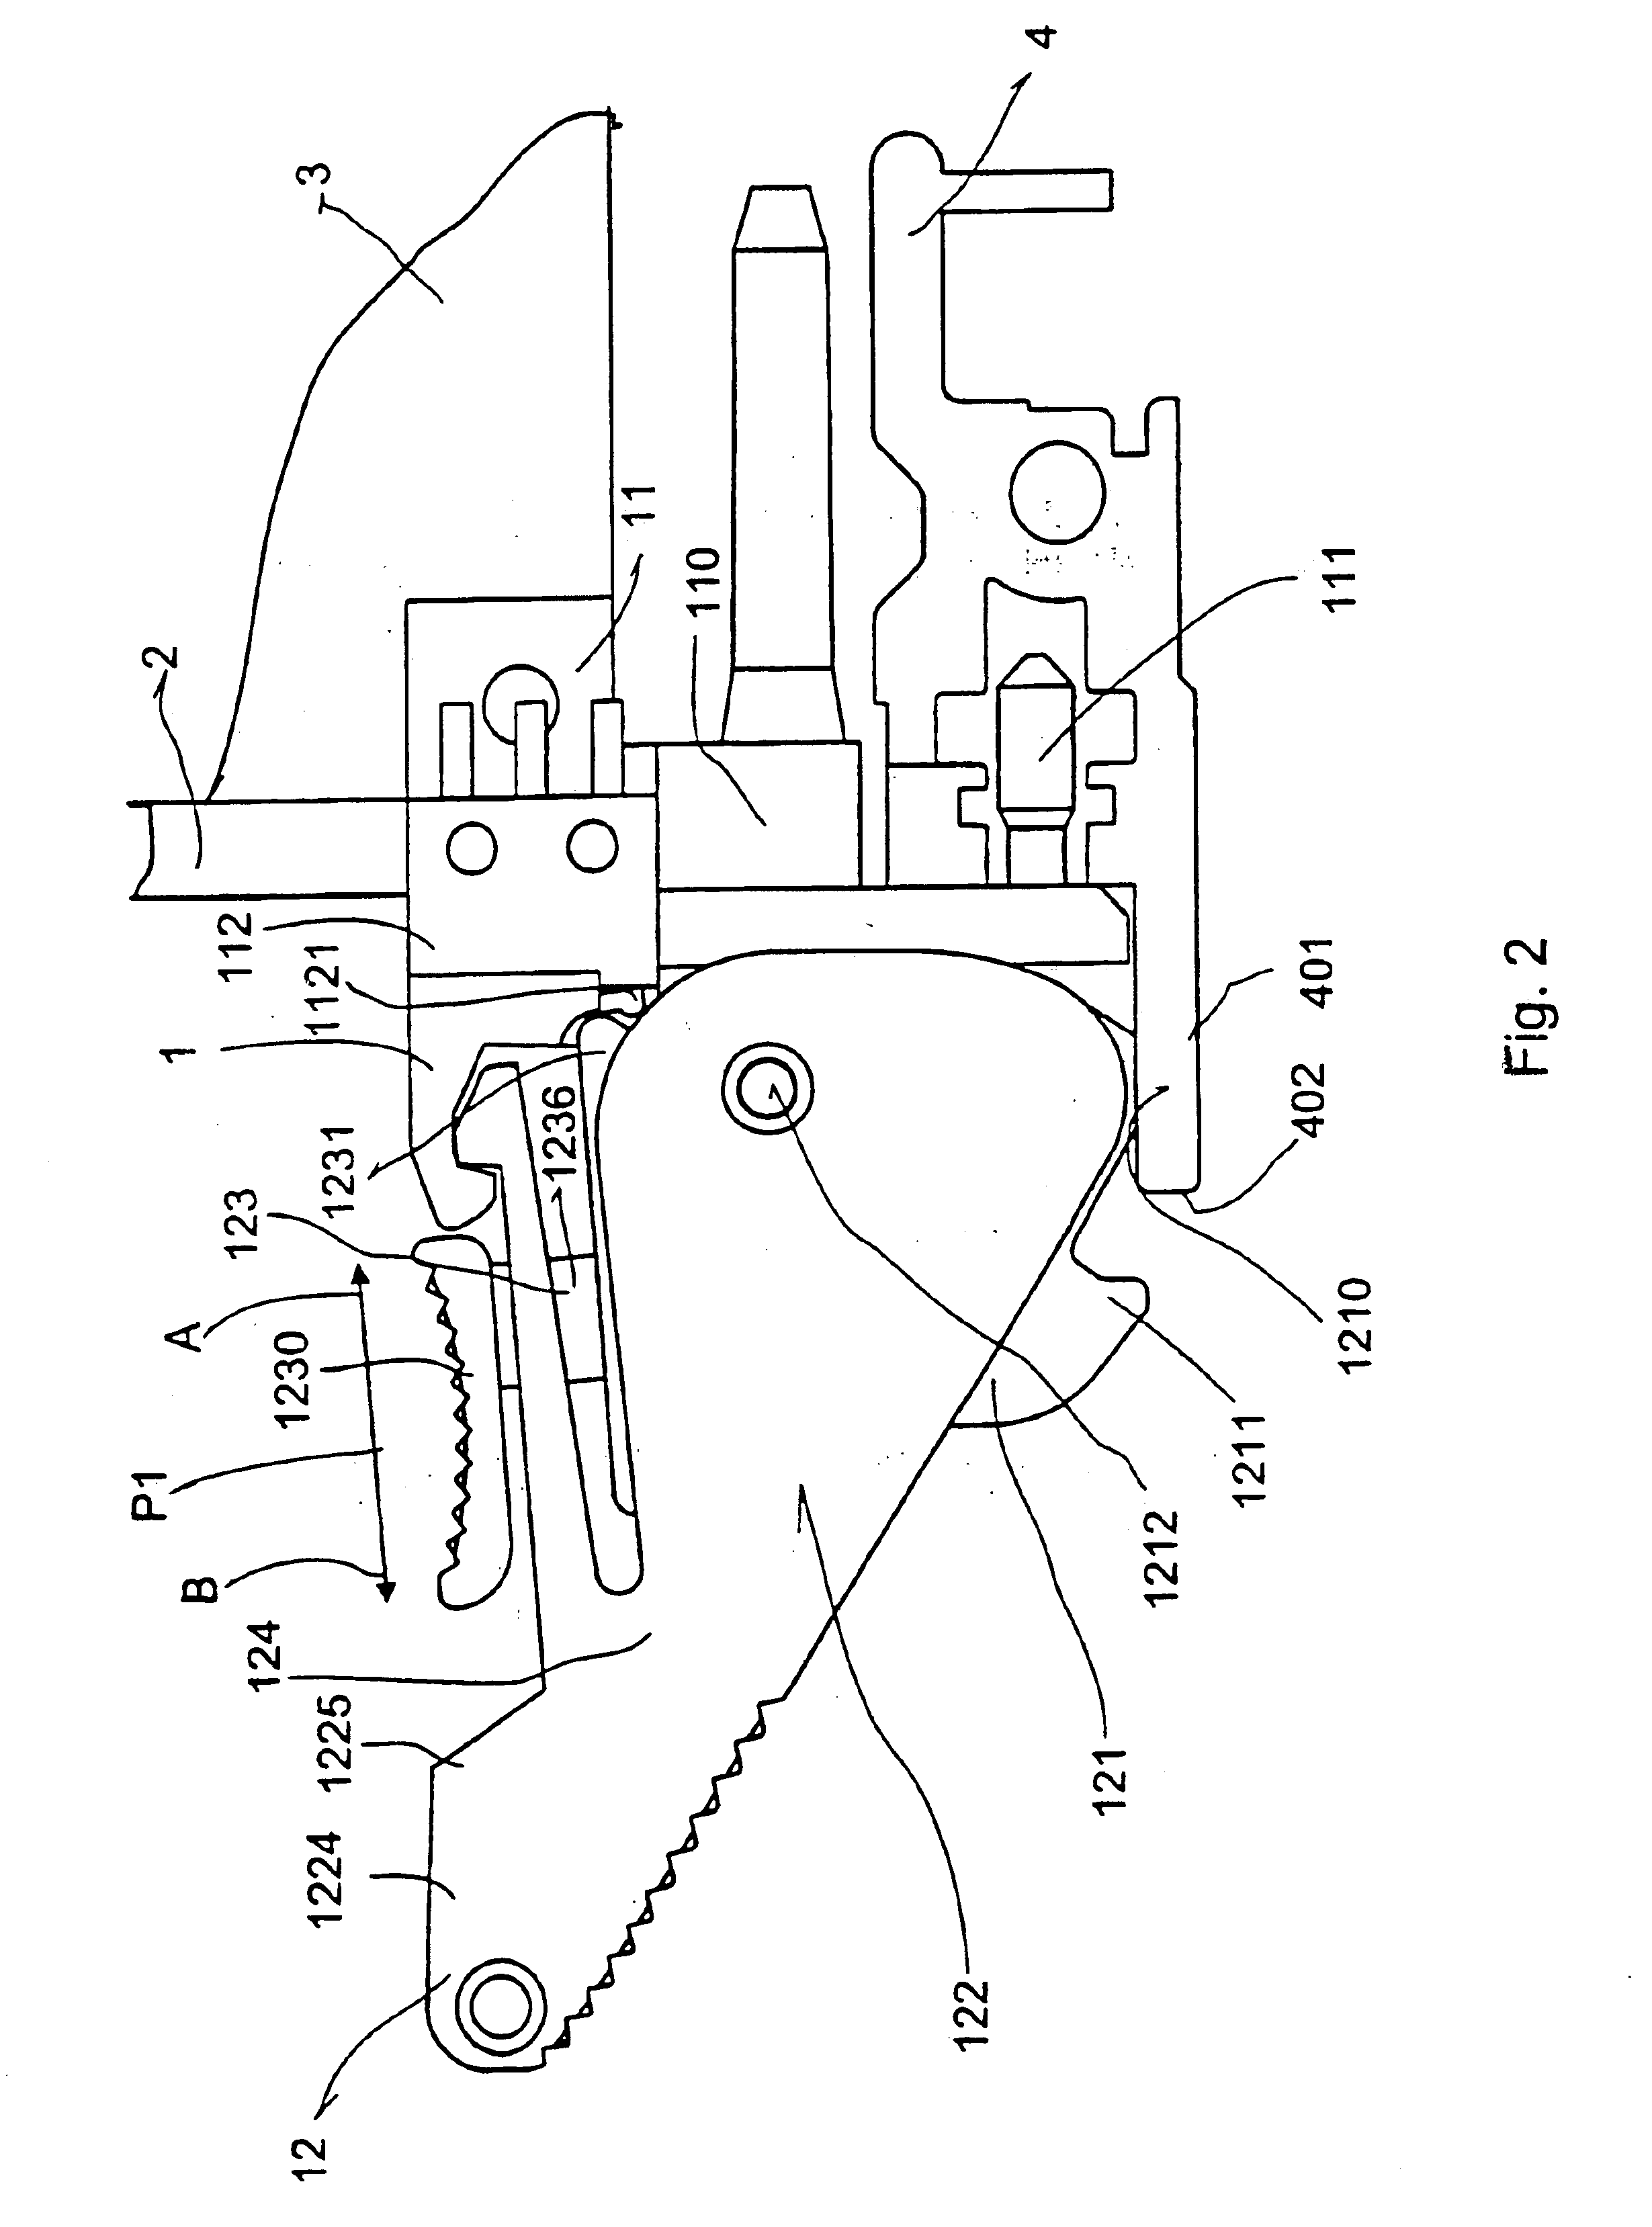 Actuator element for levering in and out printed circuit modules with locking slide, front element for a printed circuit module with actuator element, and subrack that receives printed circuit modules